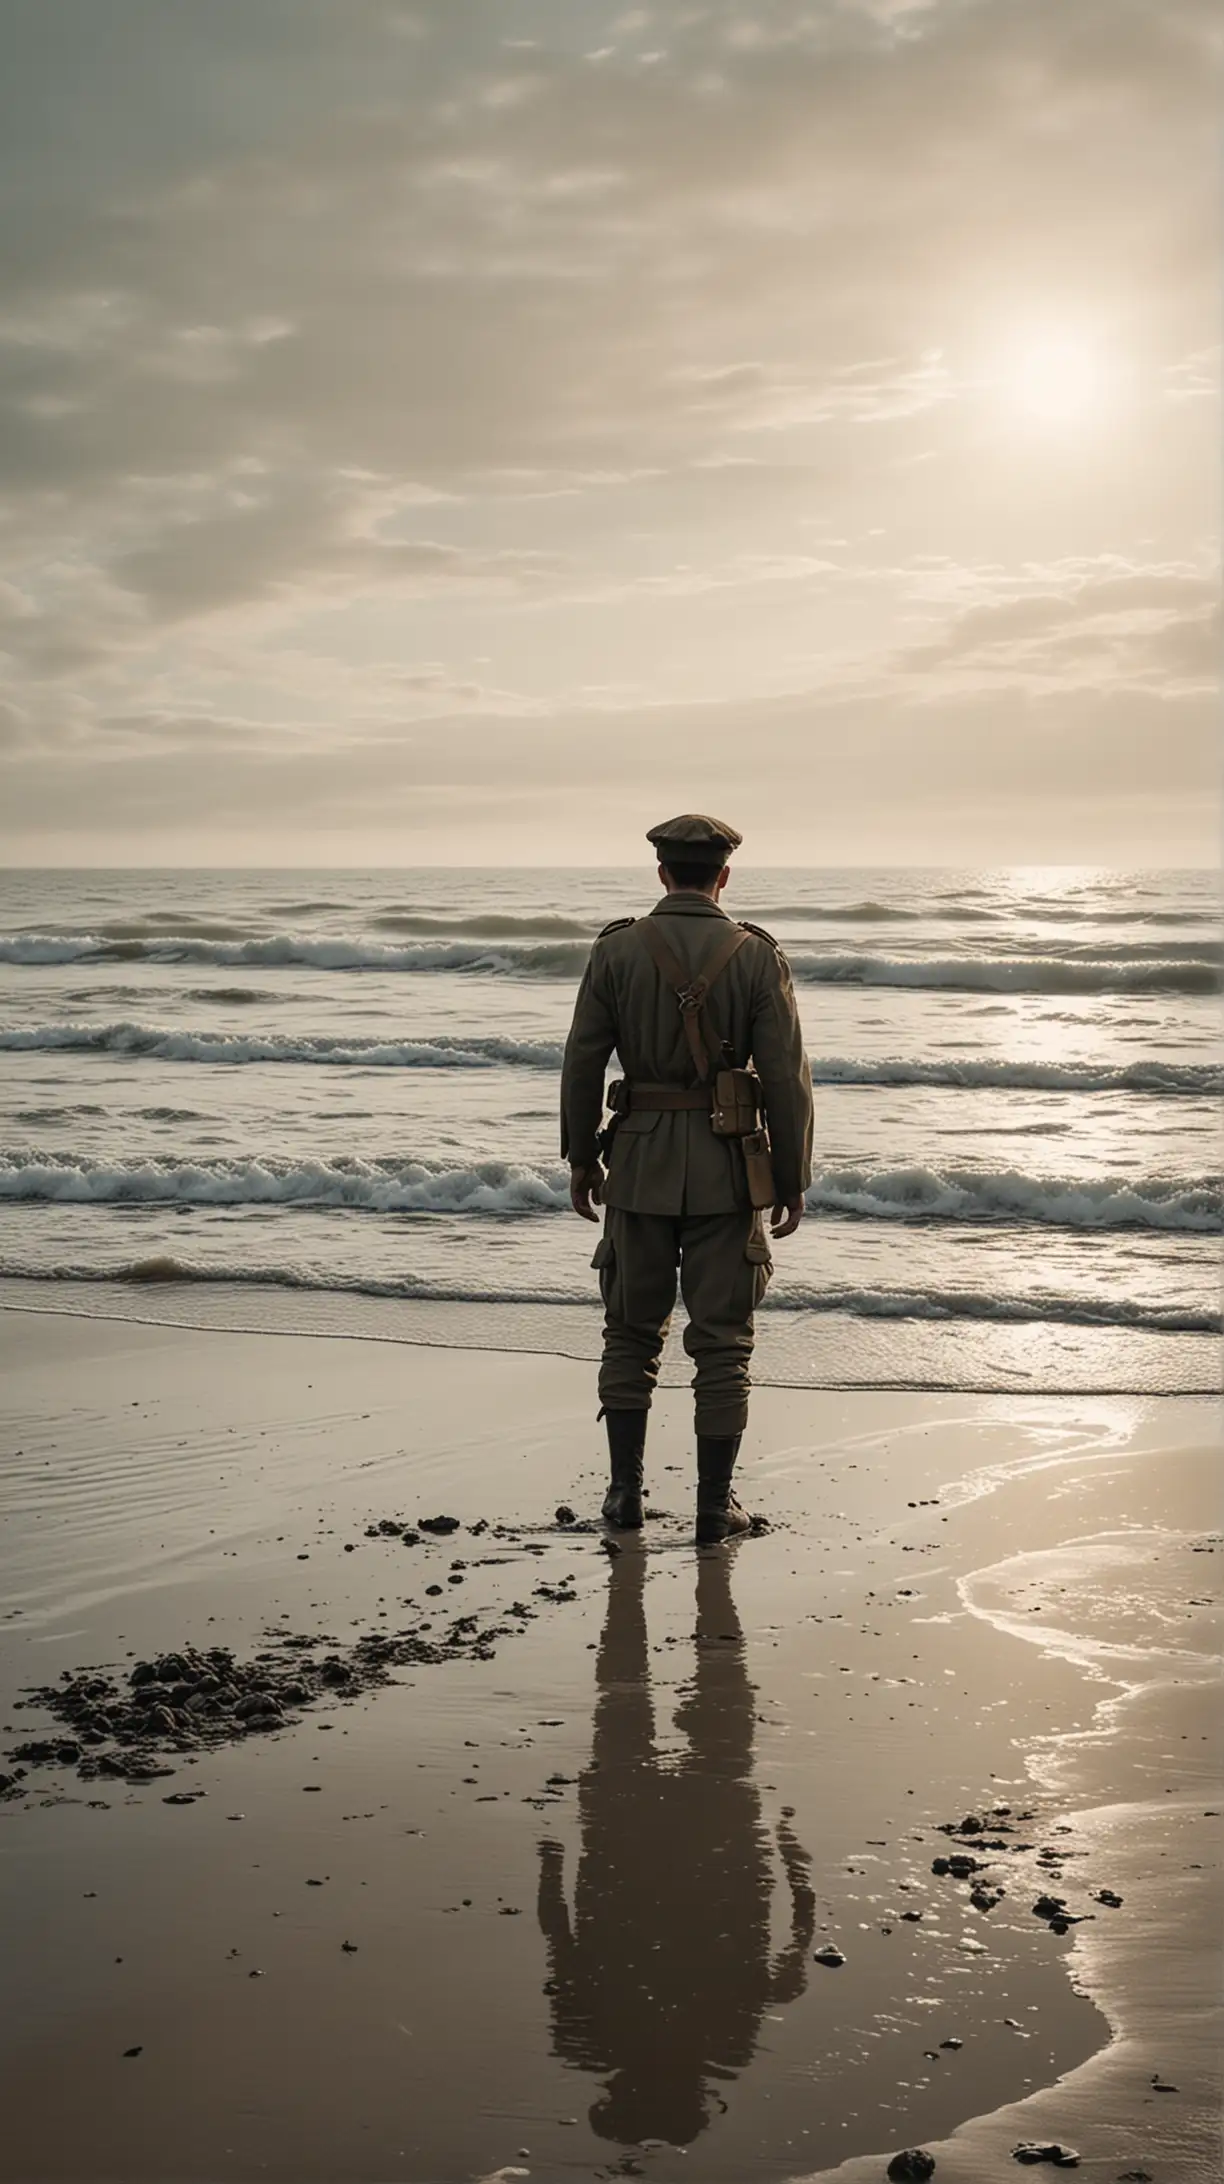 In the style of the movie "Dunkirk", a lone soldier stands on a  a beach.